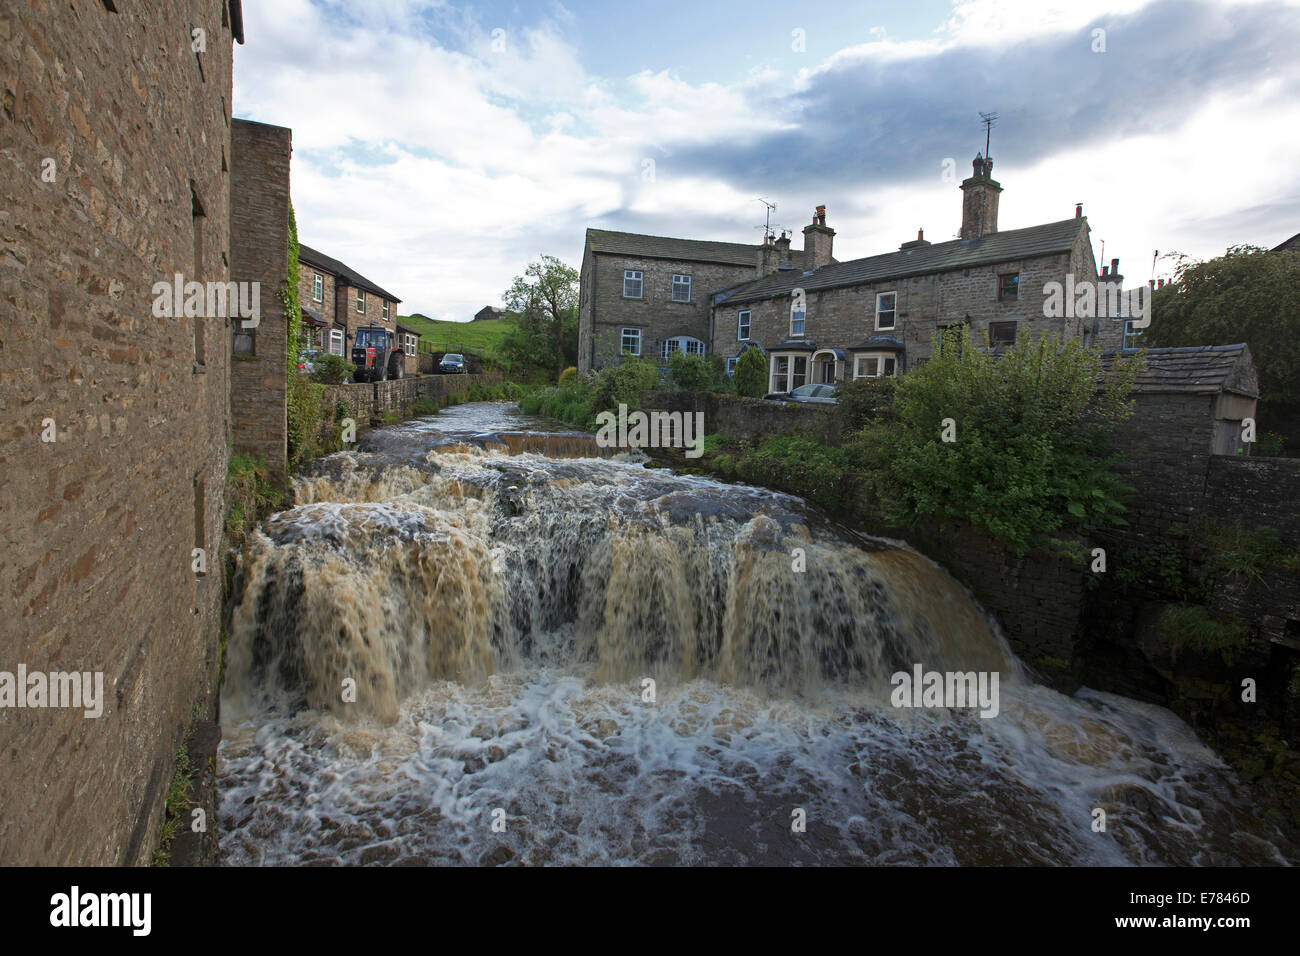 Foaming waters of picturesque Gayle Beck Falls pouring between historic stone cottages at village of Hawes in Yorkshire England Stock Photo